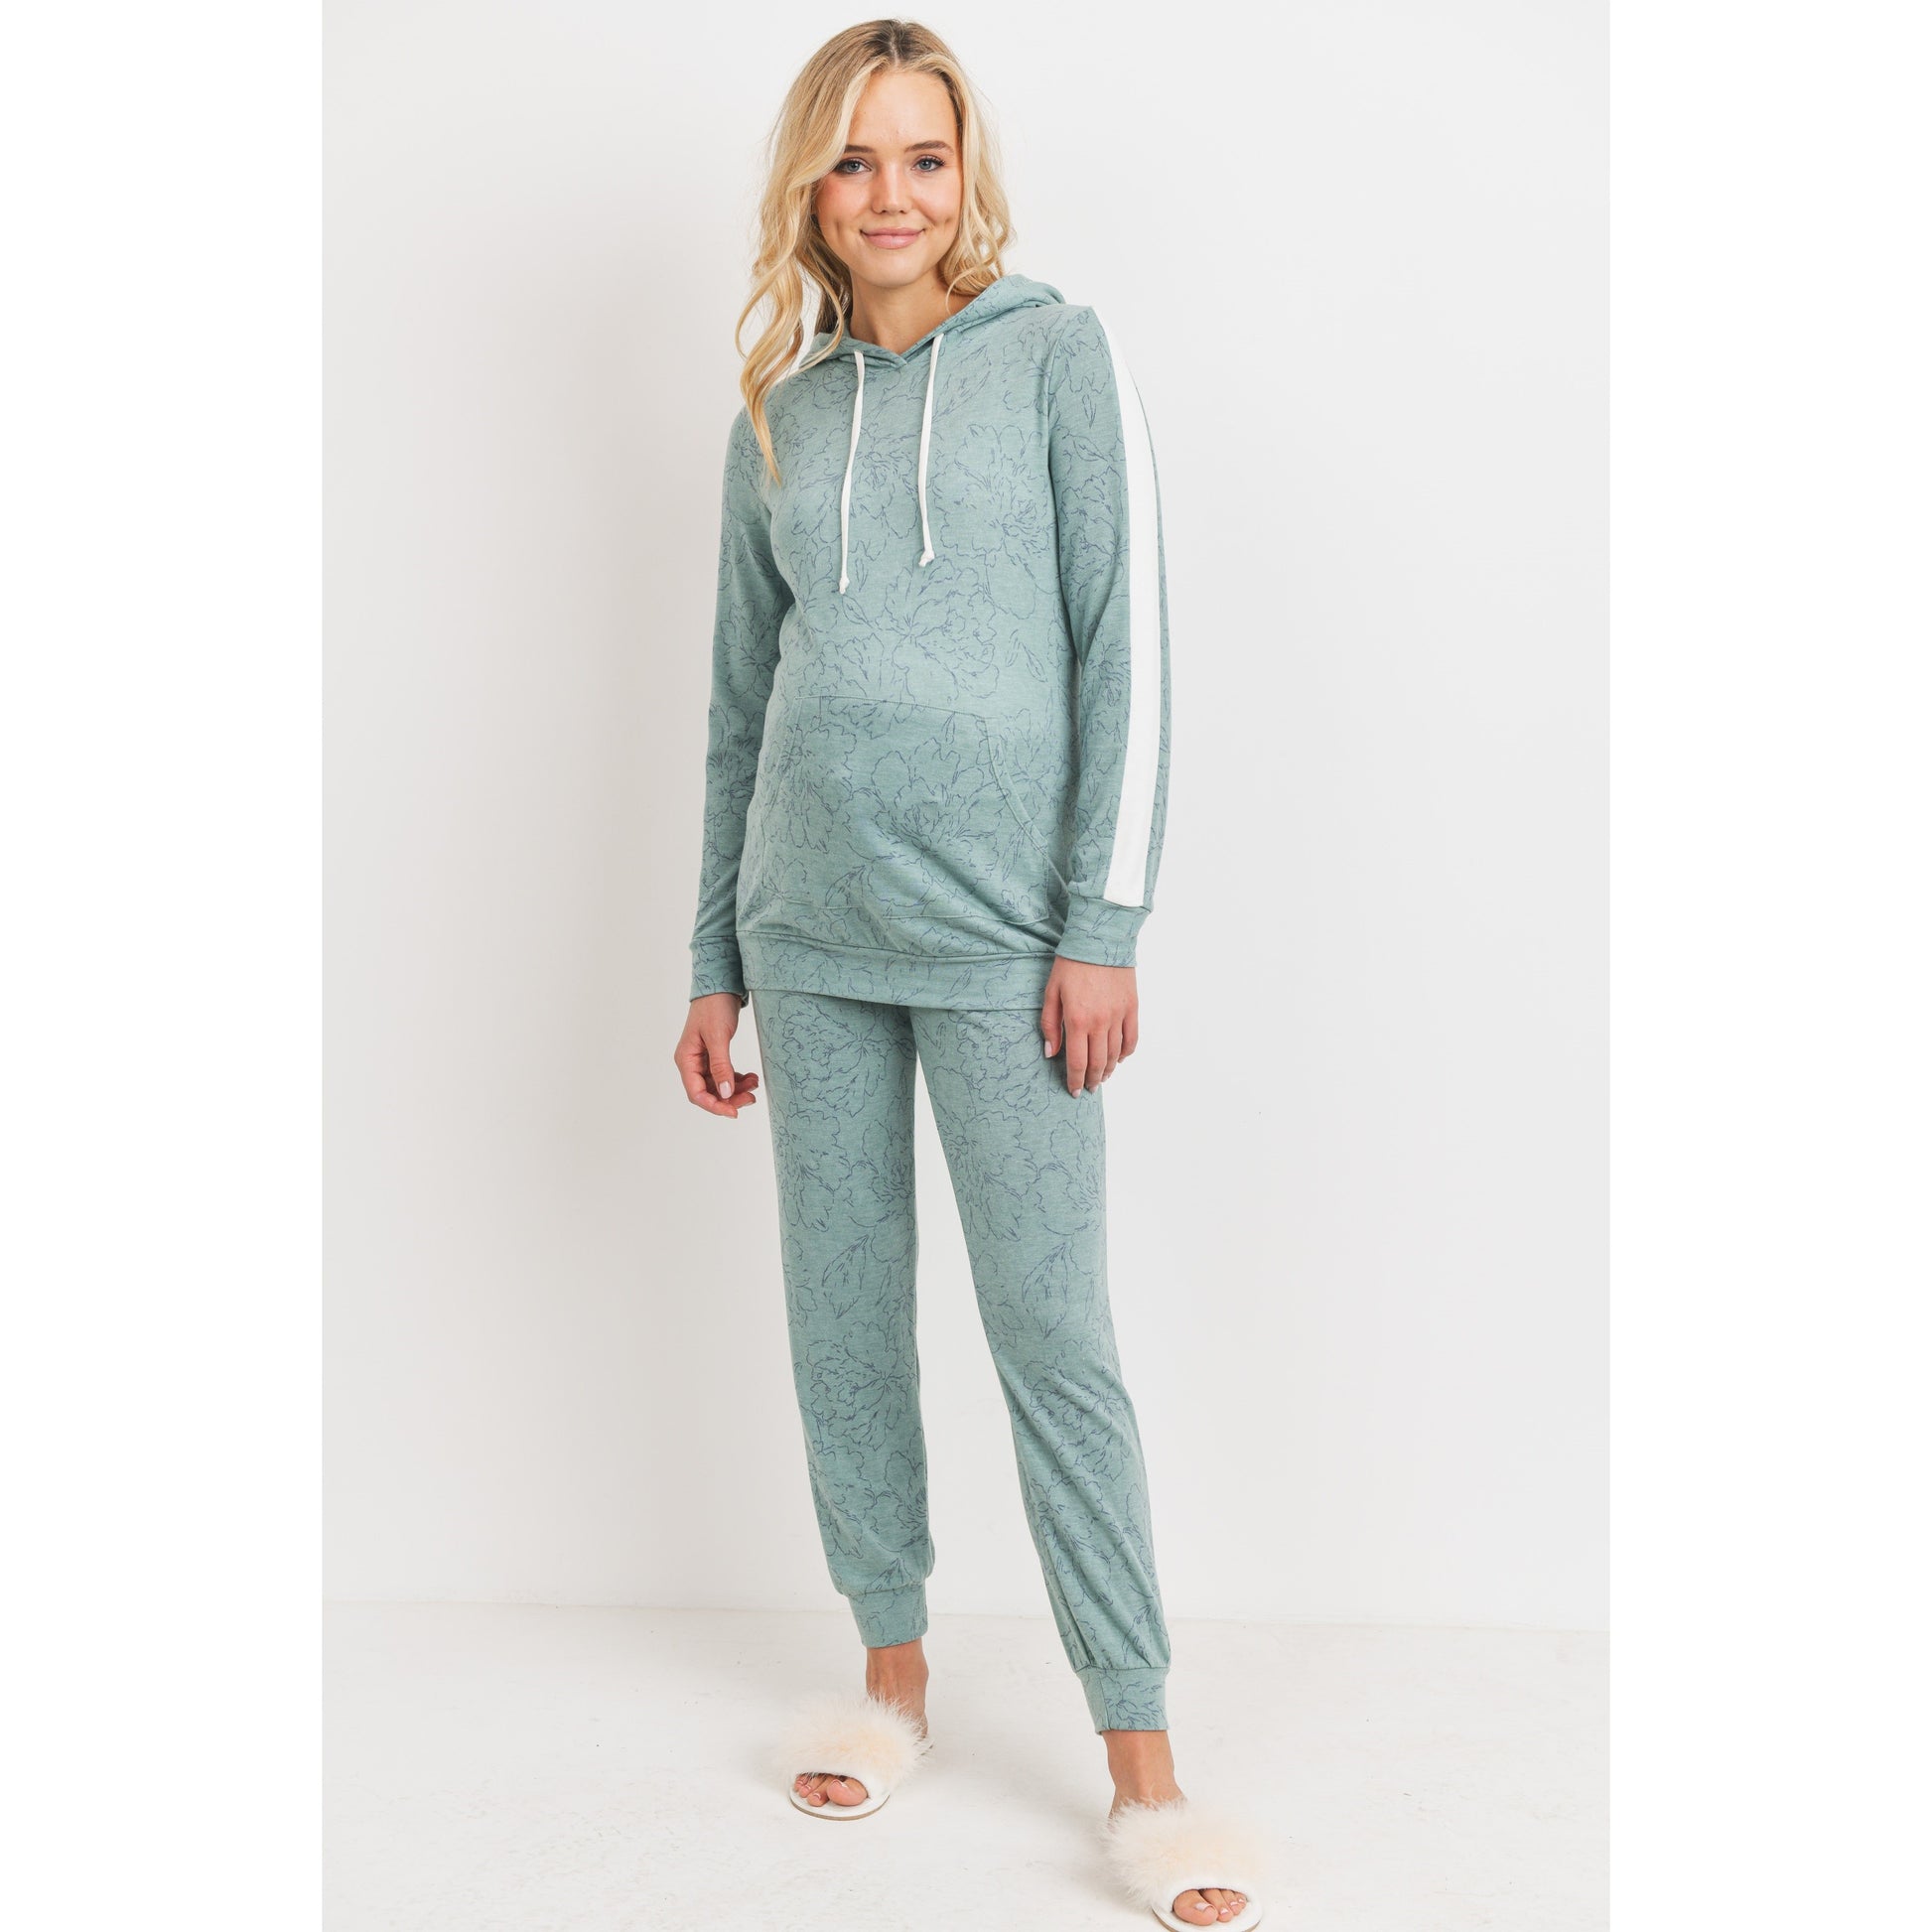 French Terry Maternity Sweatpants – bumpmaternityboutique